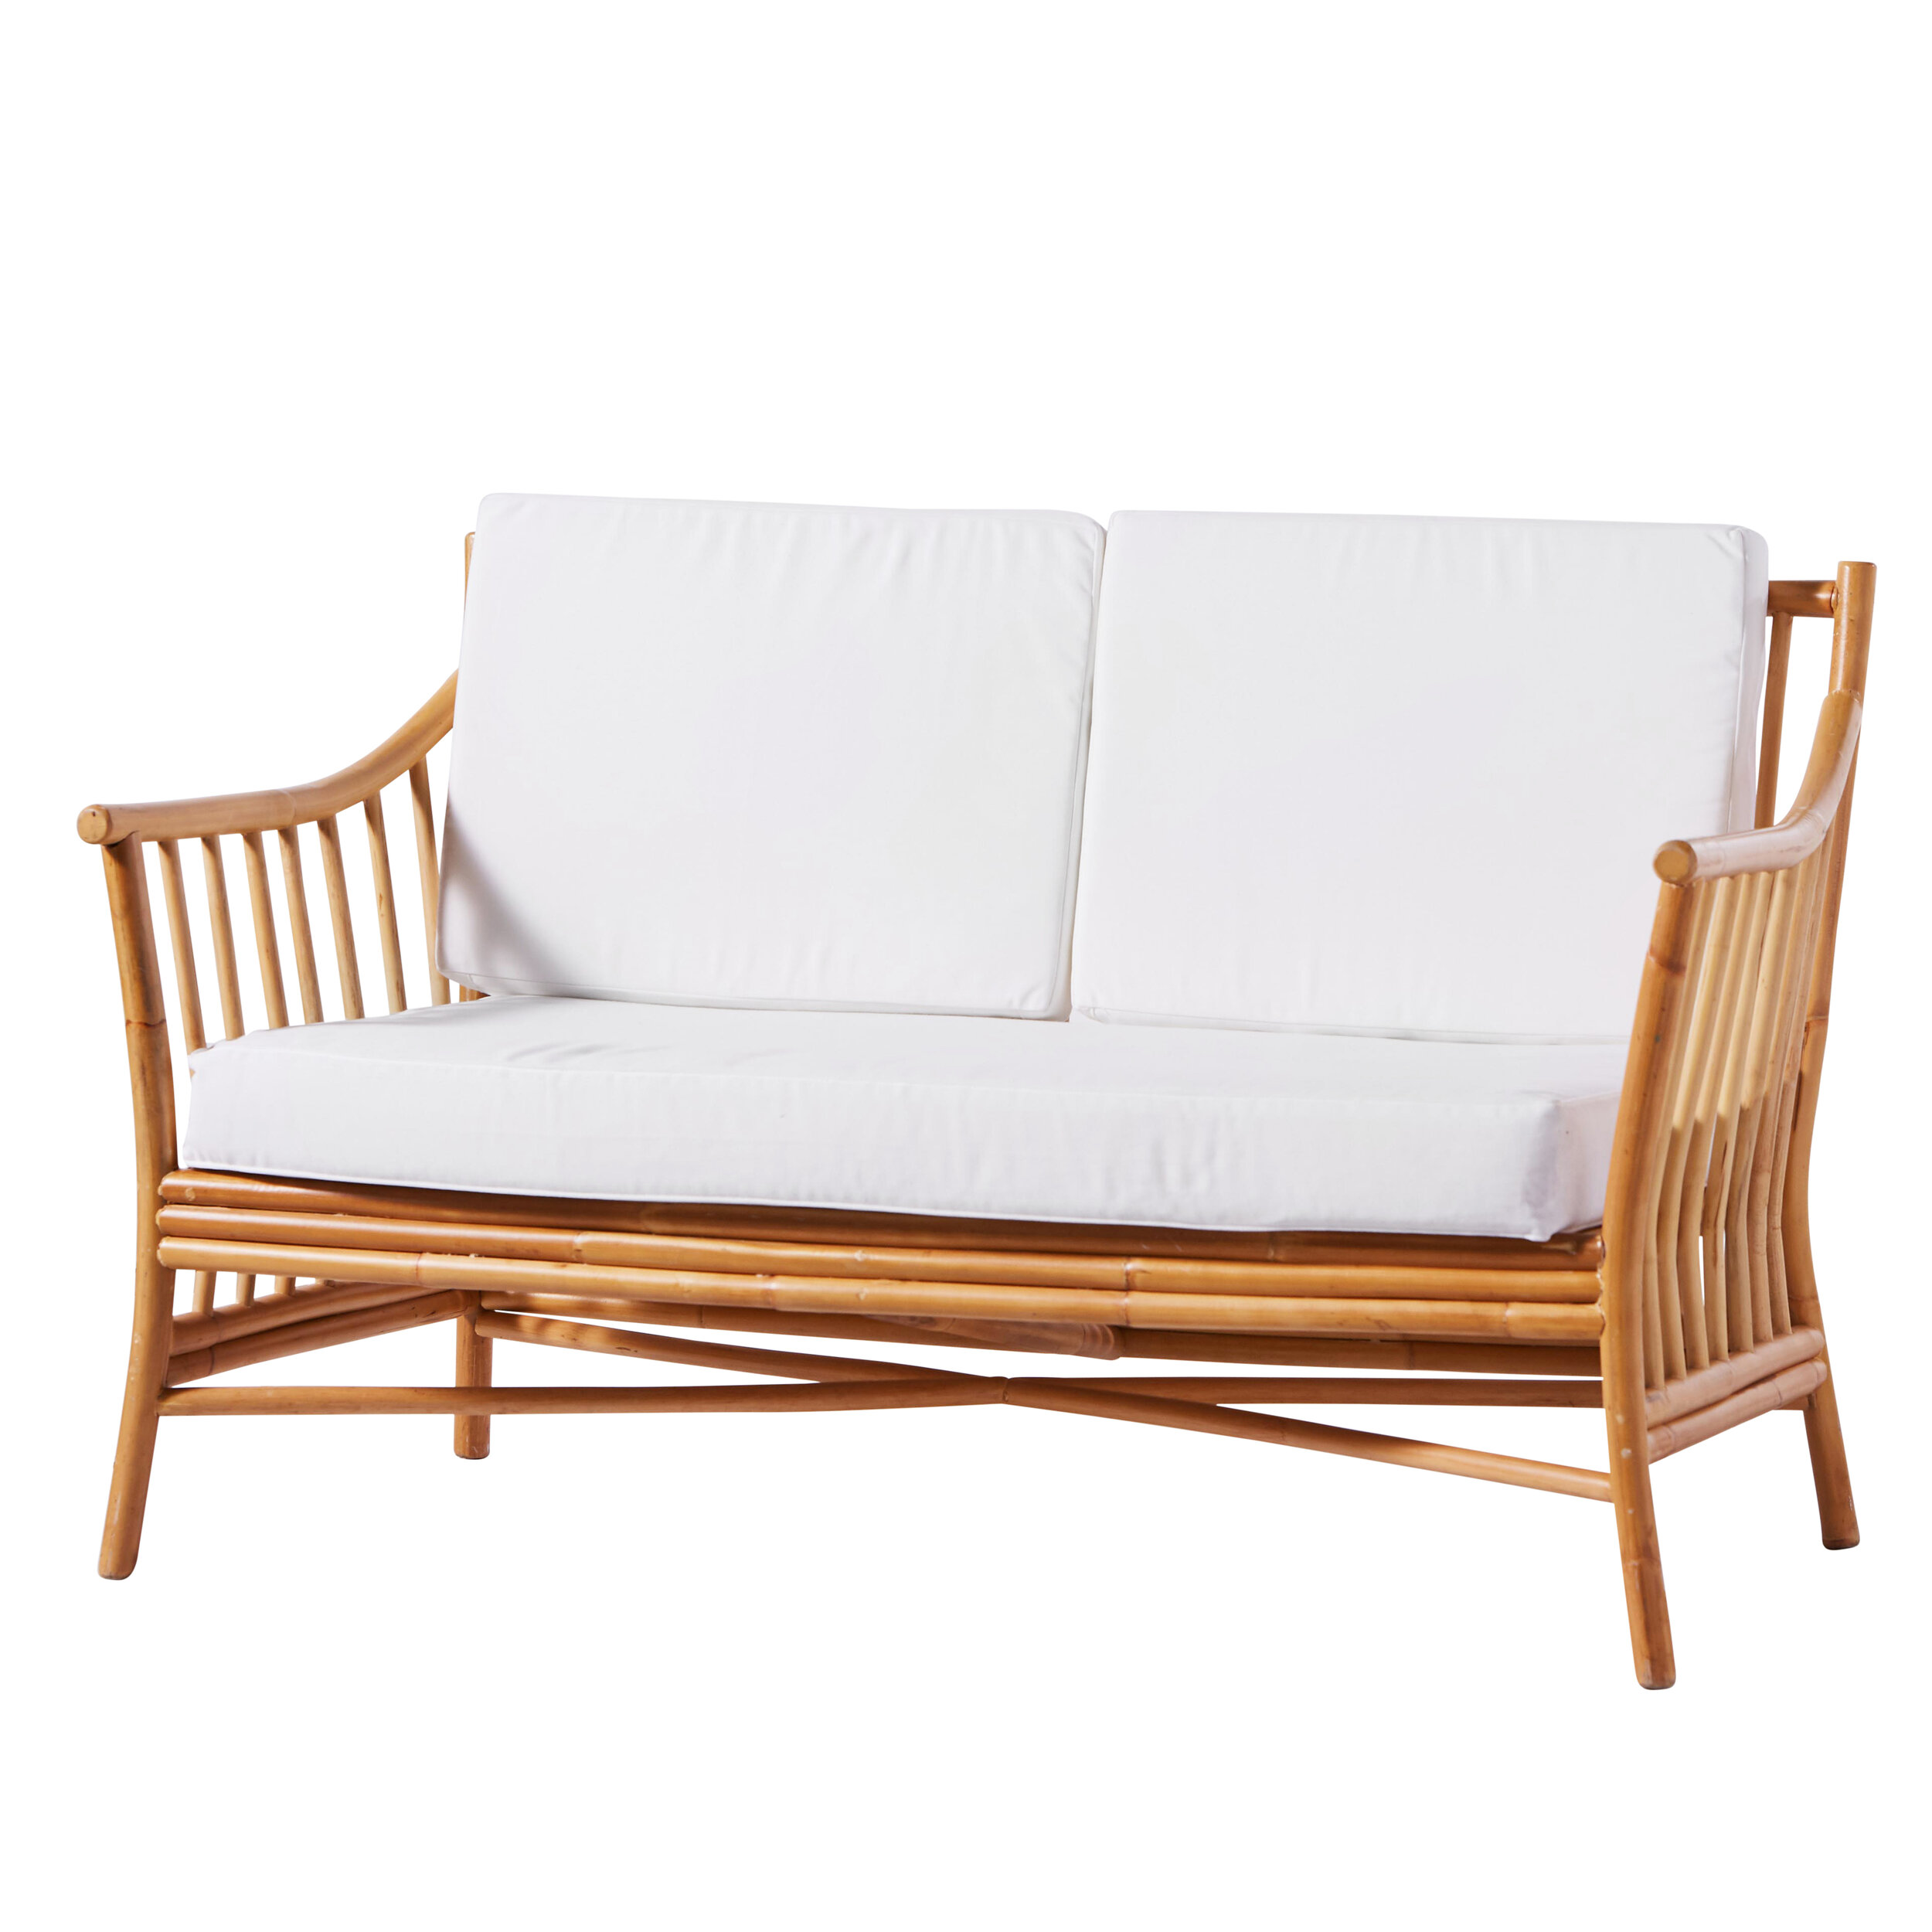 Simply Seated Hamptons Bamboo Sofa Event Hire Sydney